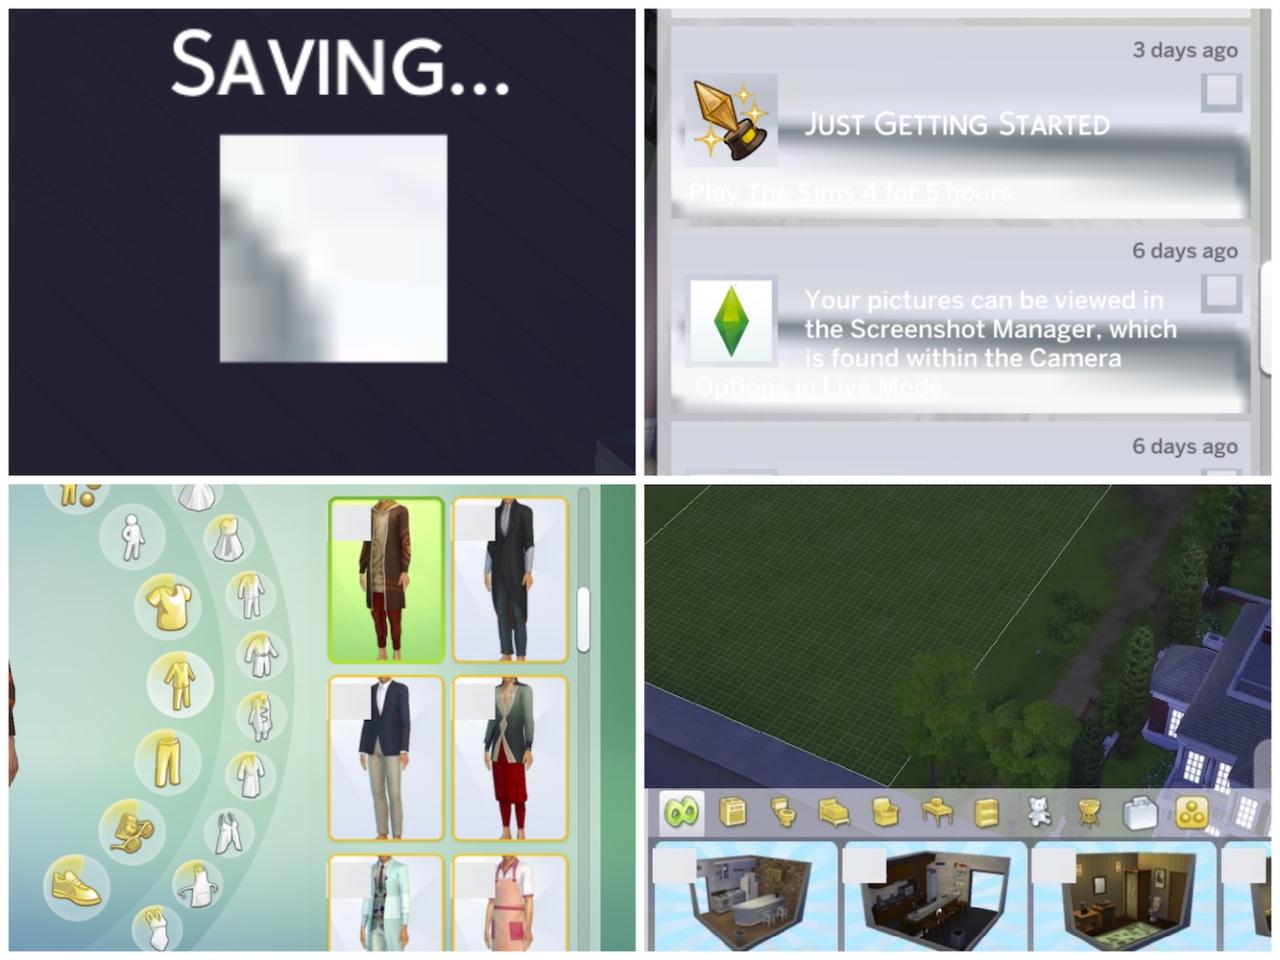 Sims 4 buttons messed up